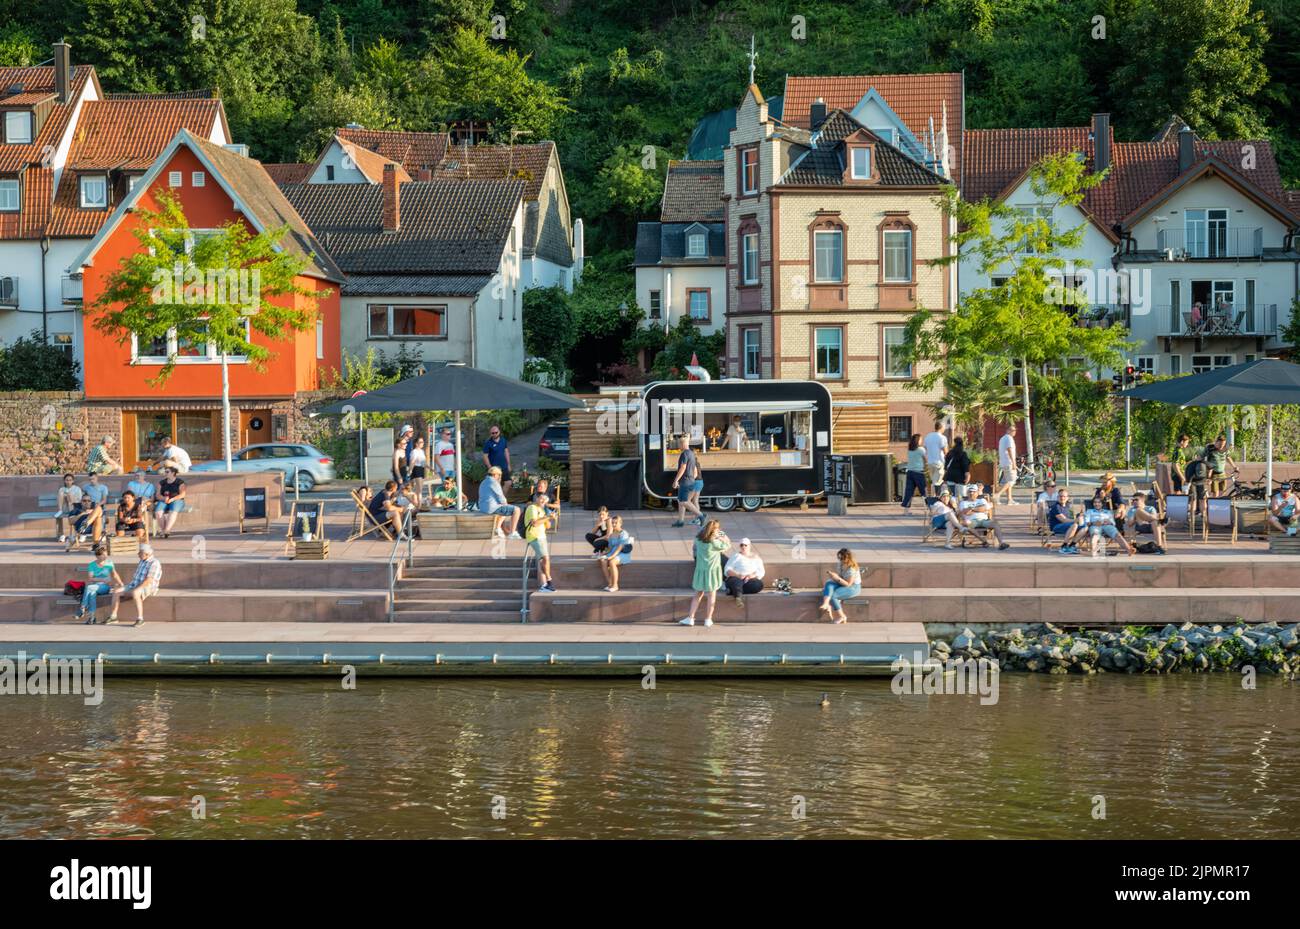 Miltenberg, Germany - July 18, 2021: The old town with people relaxing at the sun,  seen from the River Main Stock Photo